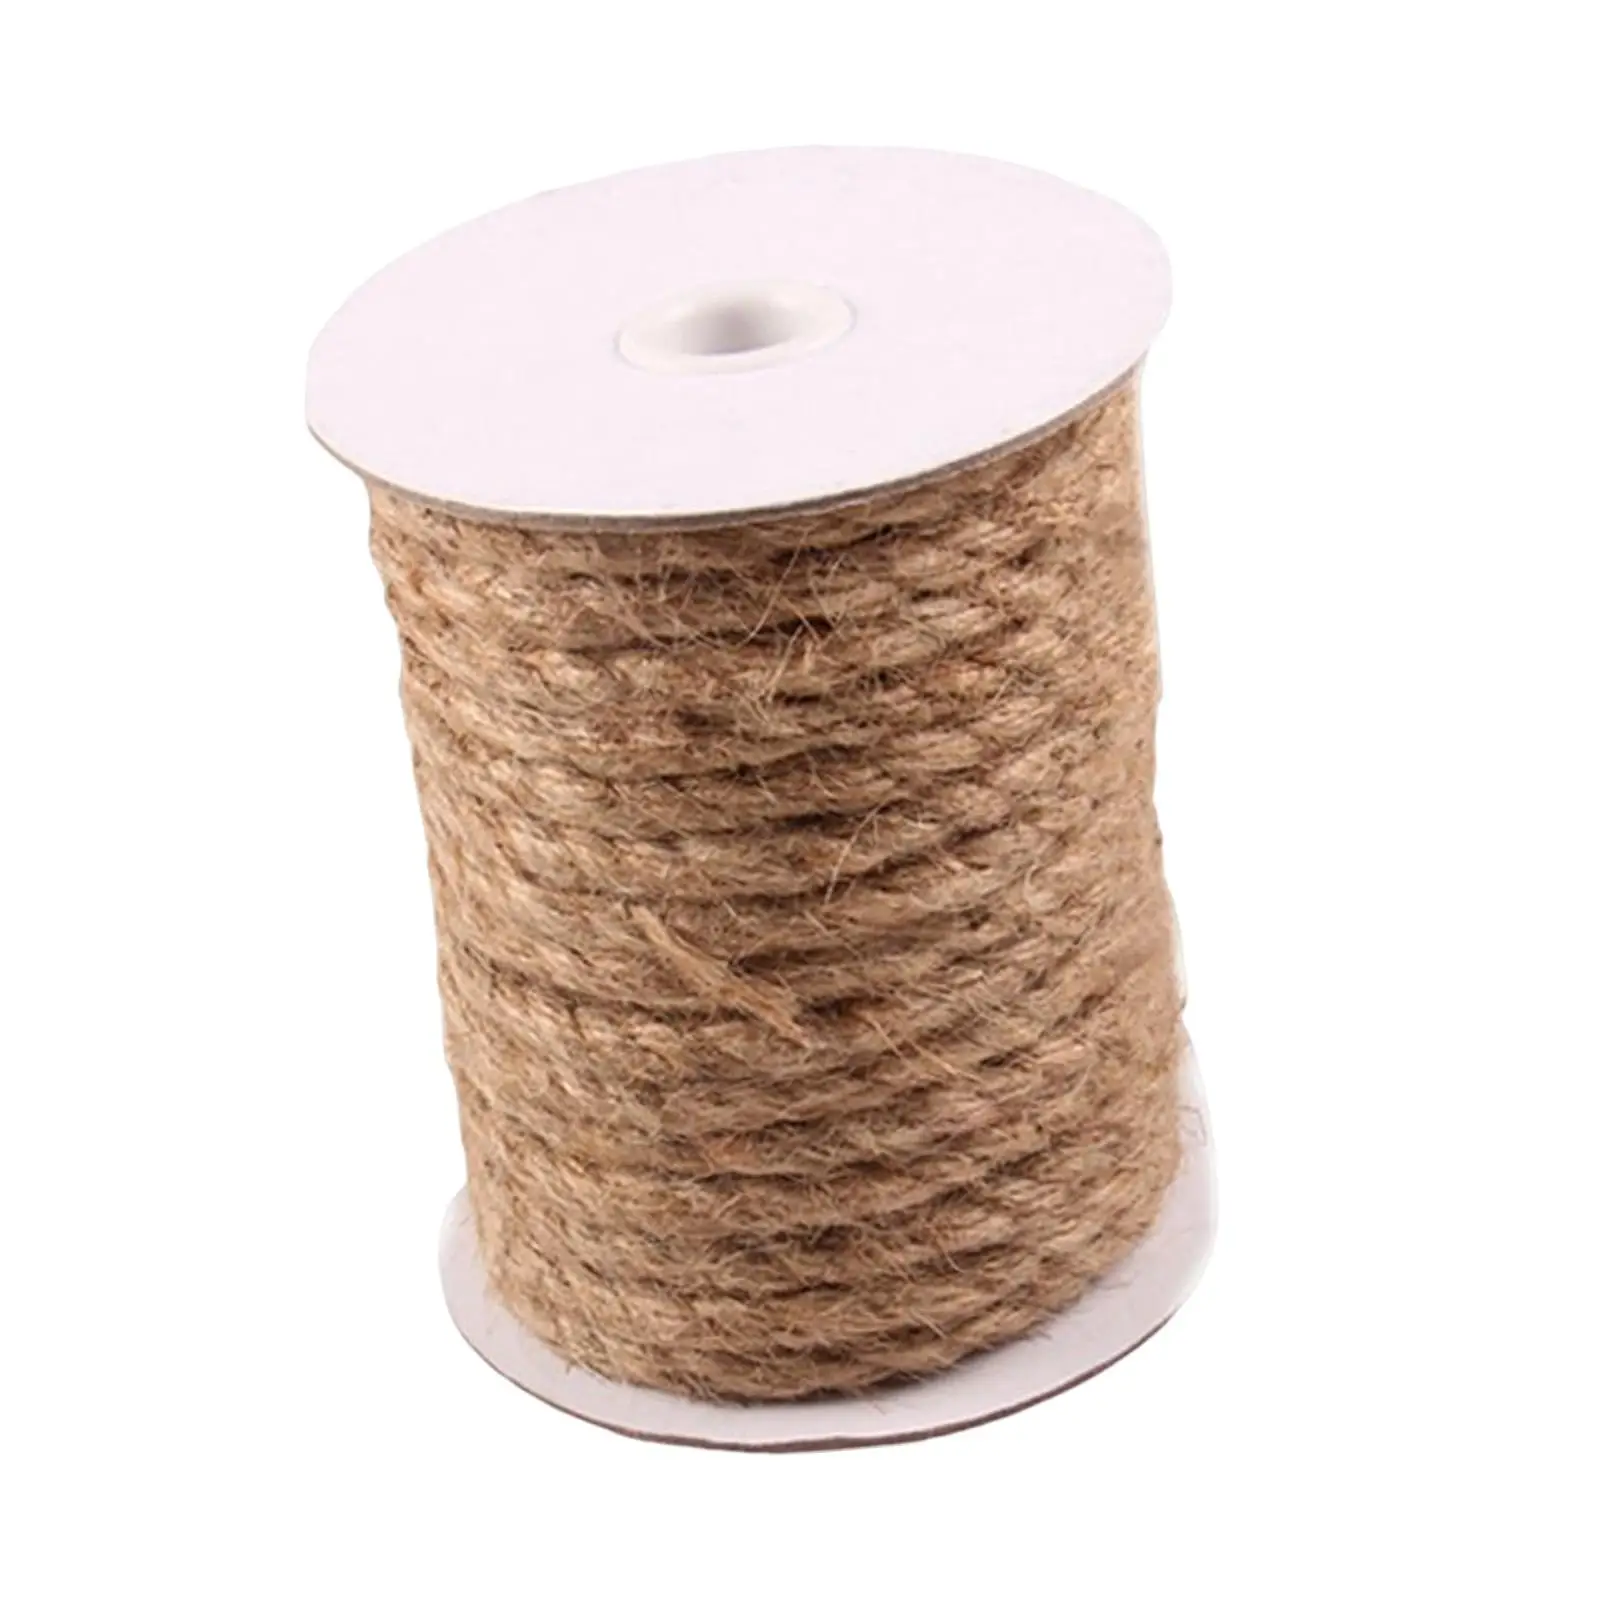 Hemp Rope Eco Friendly Weaving Rope Strong 15M for Macrame Pet Toys DIY Decoration Gift Wrapping Decorative Accents